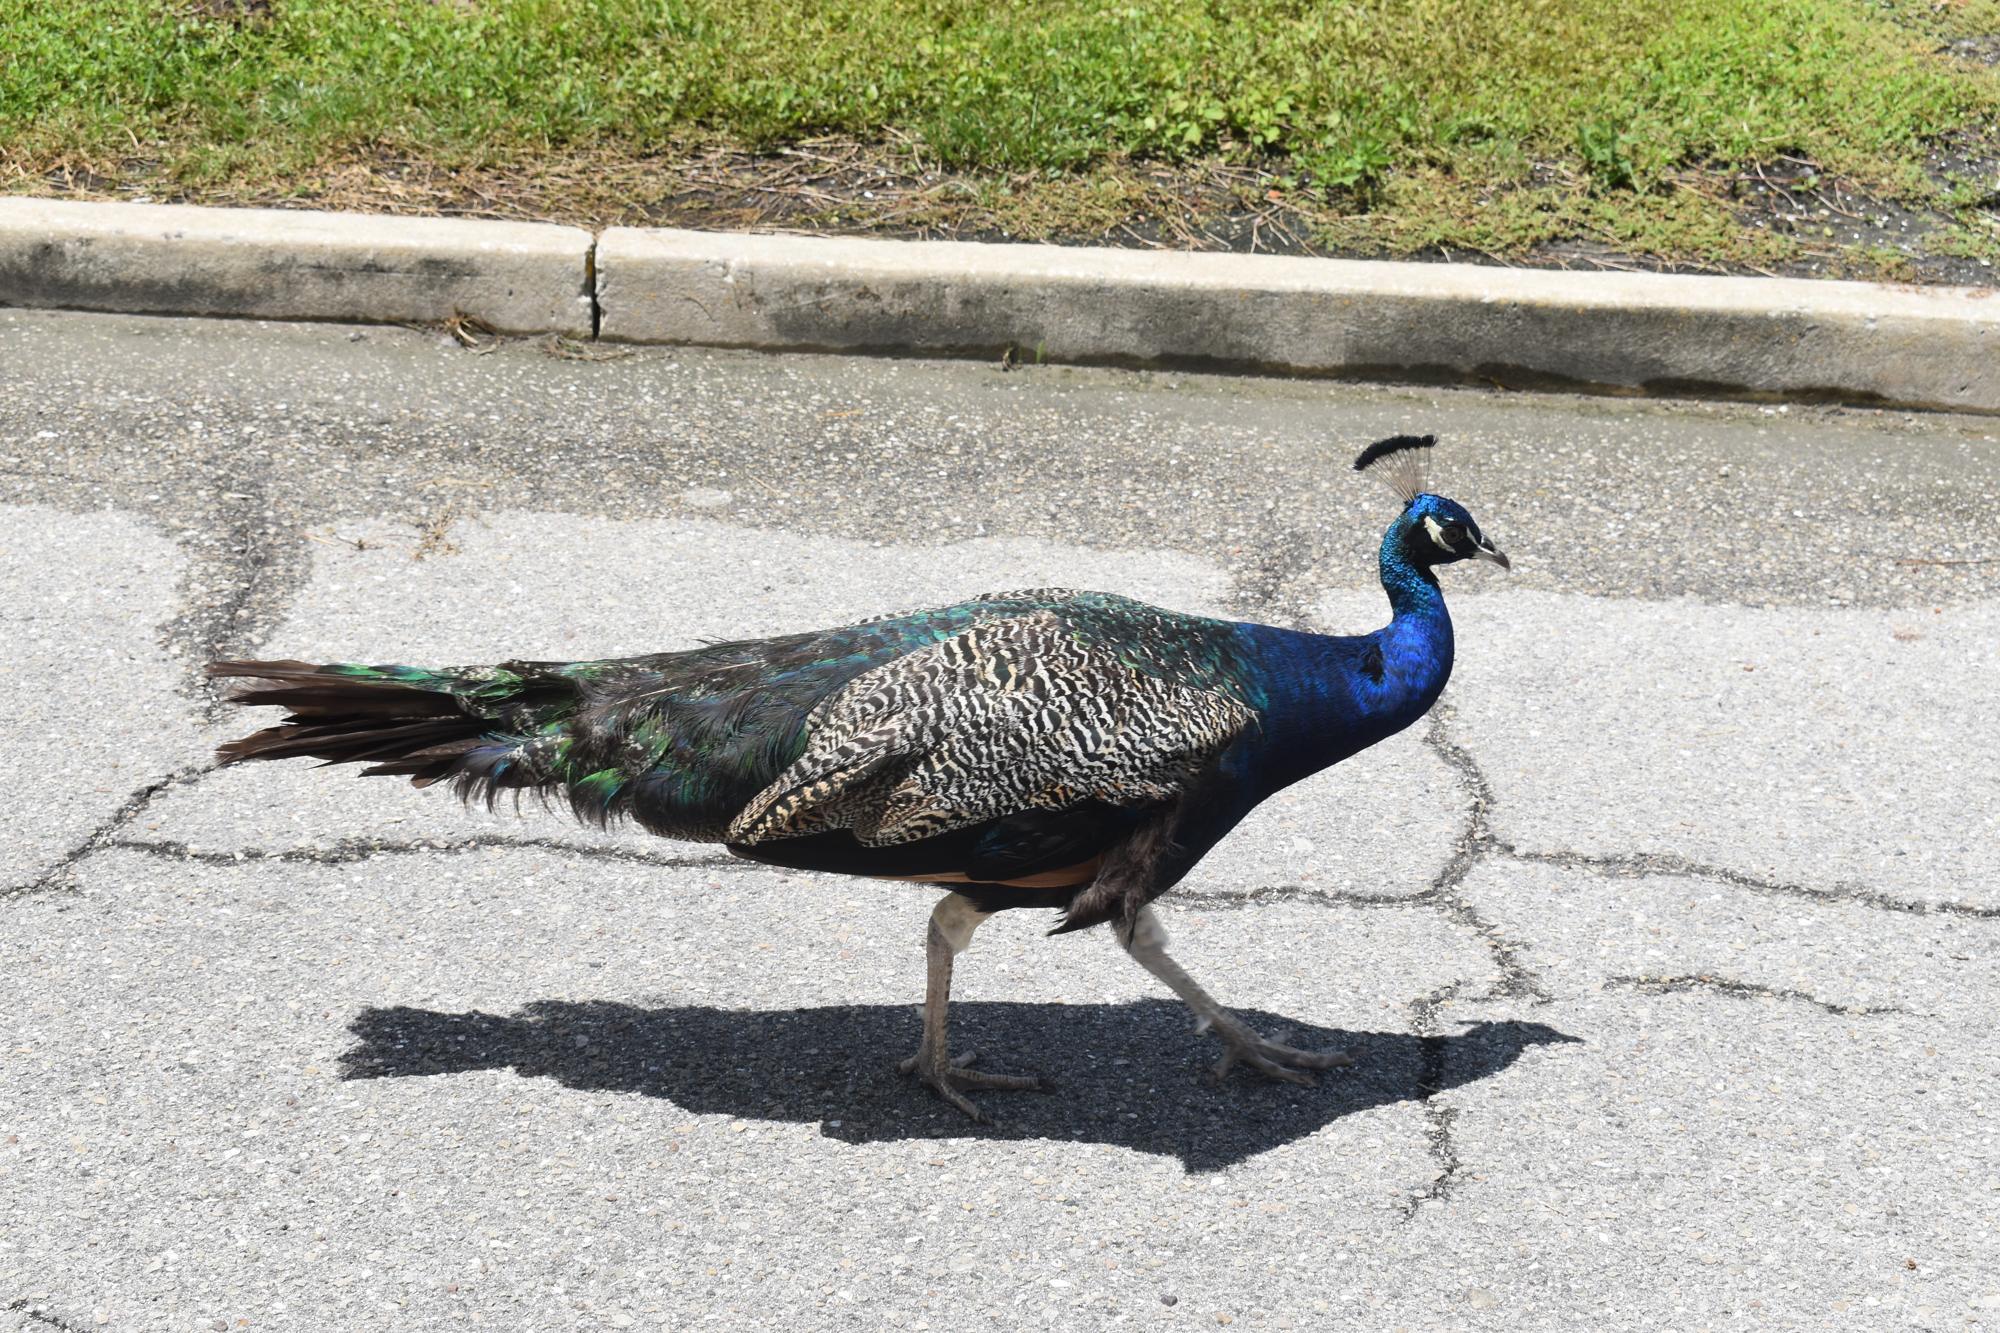 The debate continues on Longboat Key over Longbeach Village's peacocks.